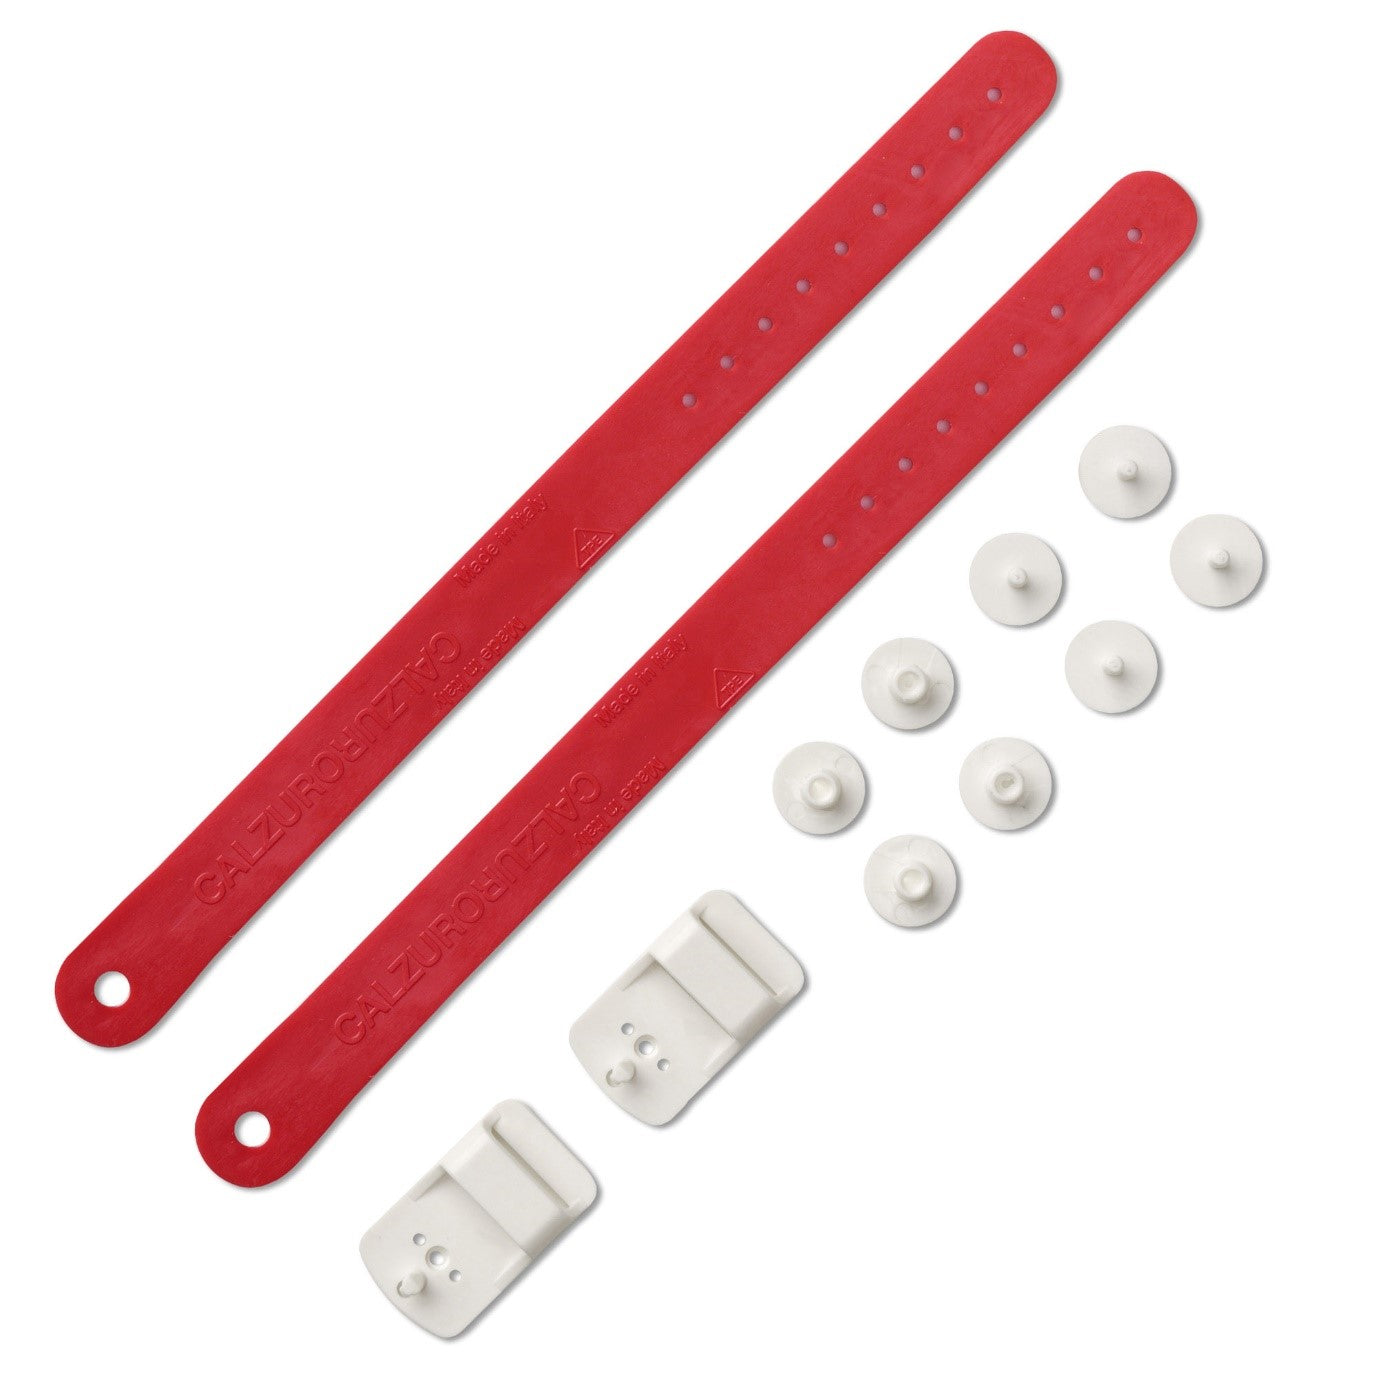 Heel Straps Kit for Calzuro Classic Clogs - Red